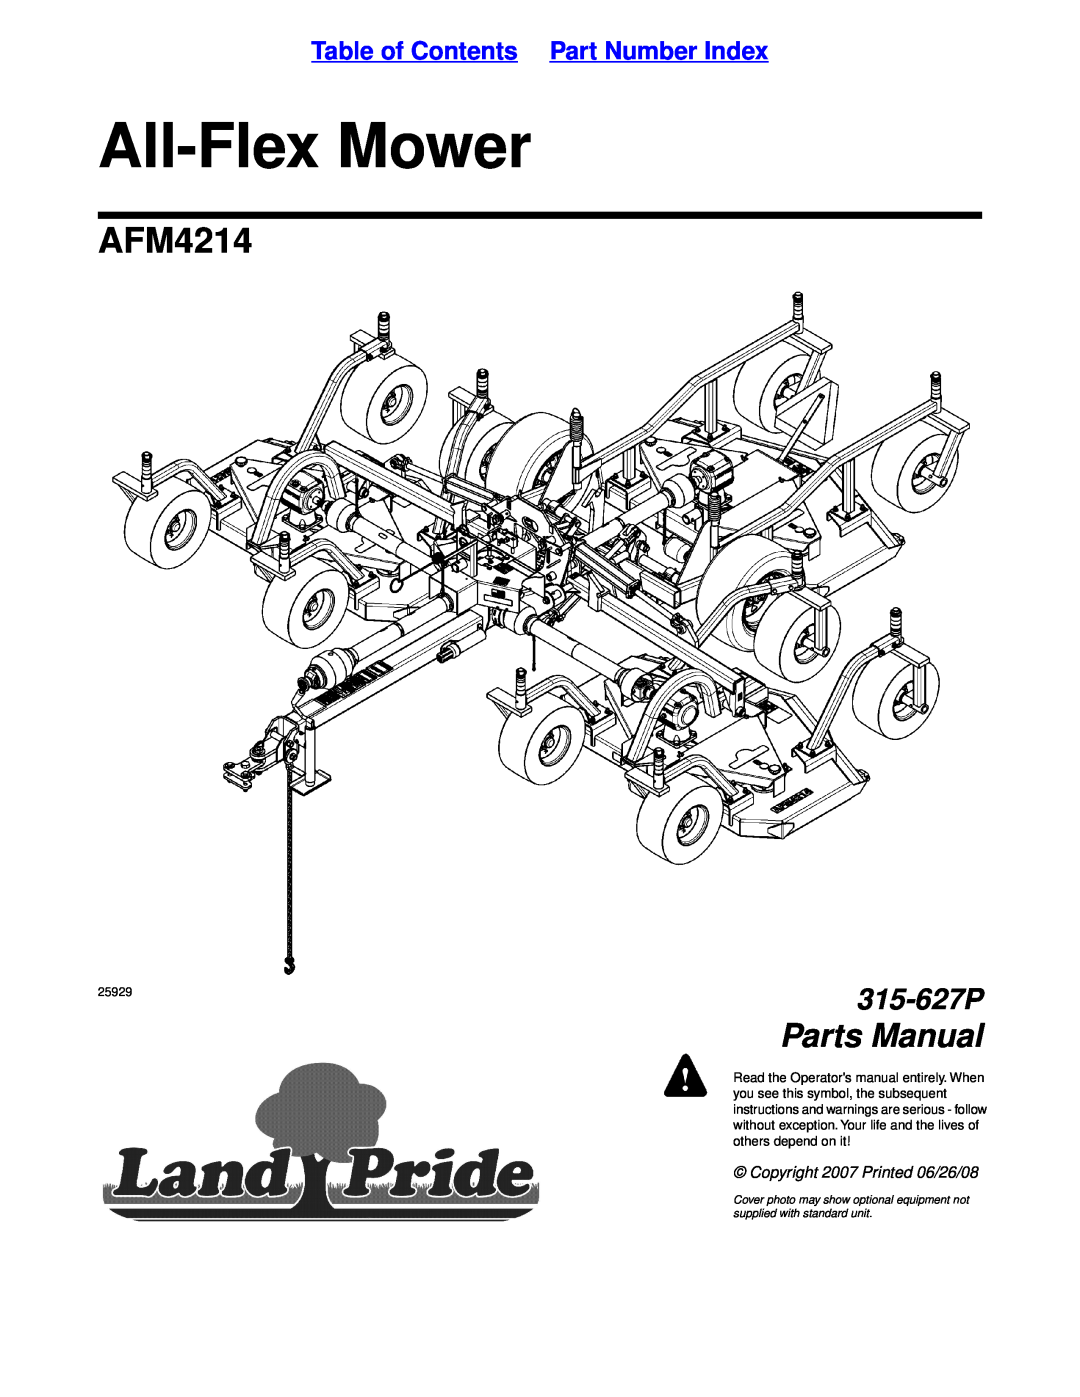 Land Pride AFM4214 manual Table of Contents Part Number Index, All-FlexMower, Parts Manual, 315-627P, others depend on it 